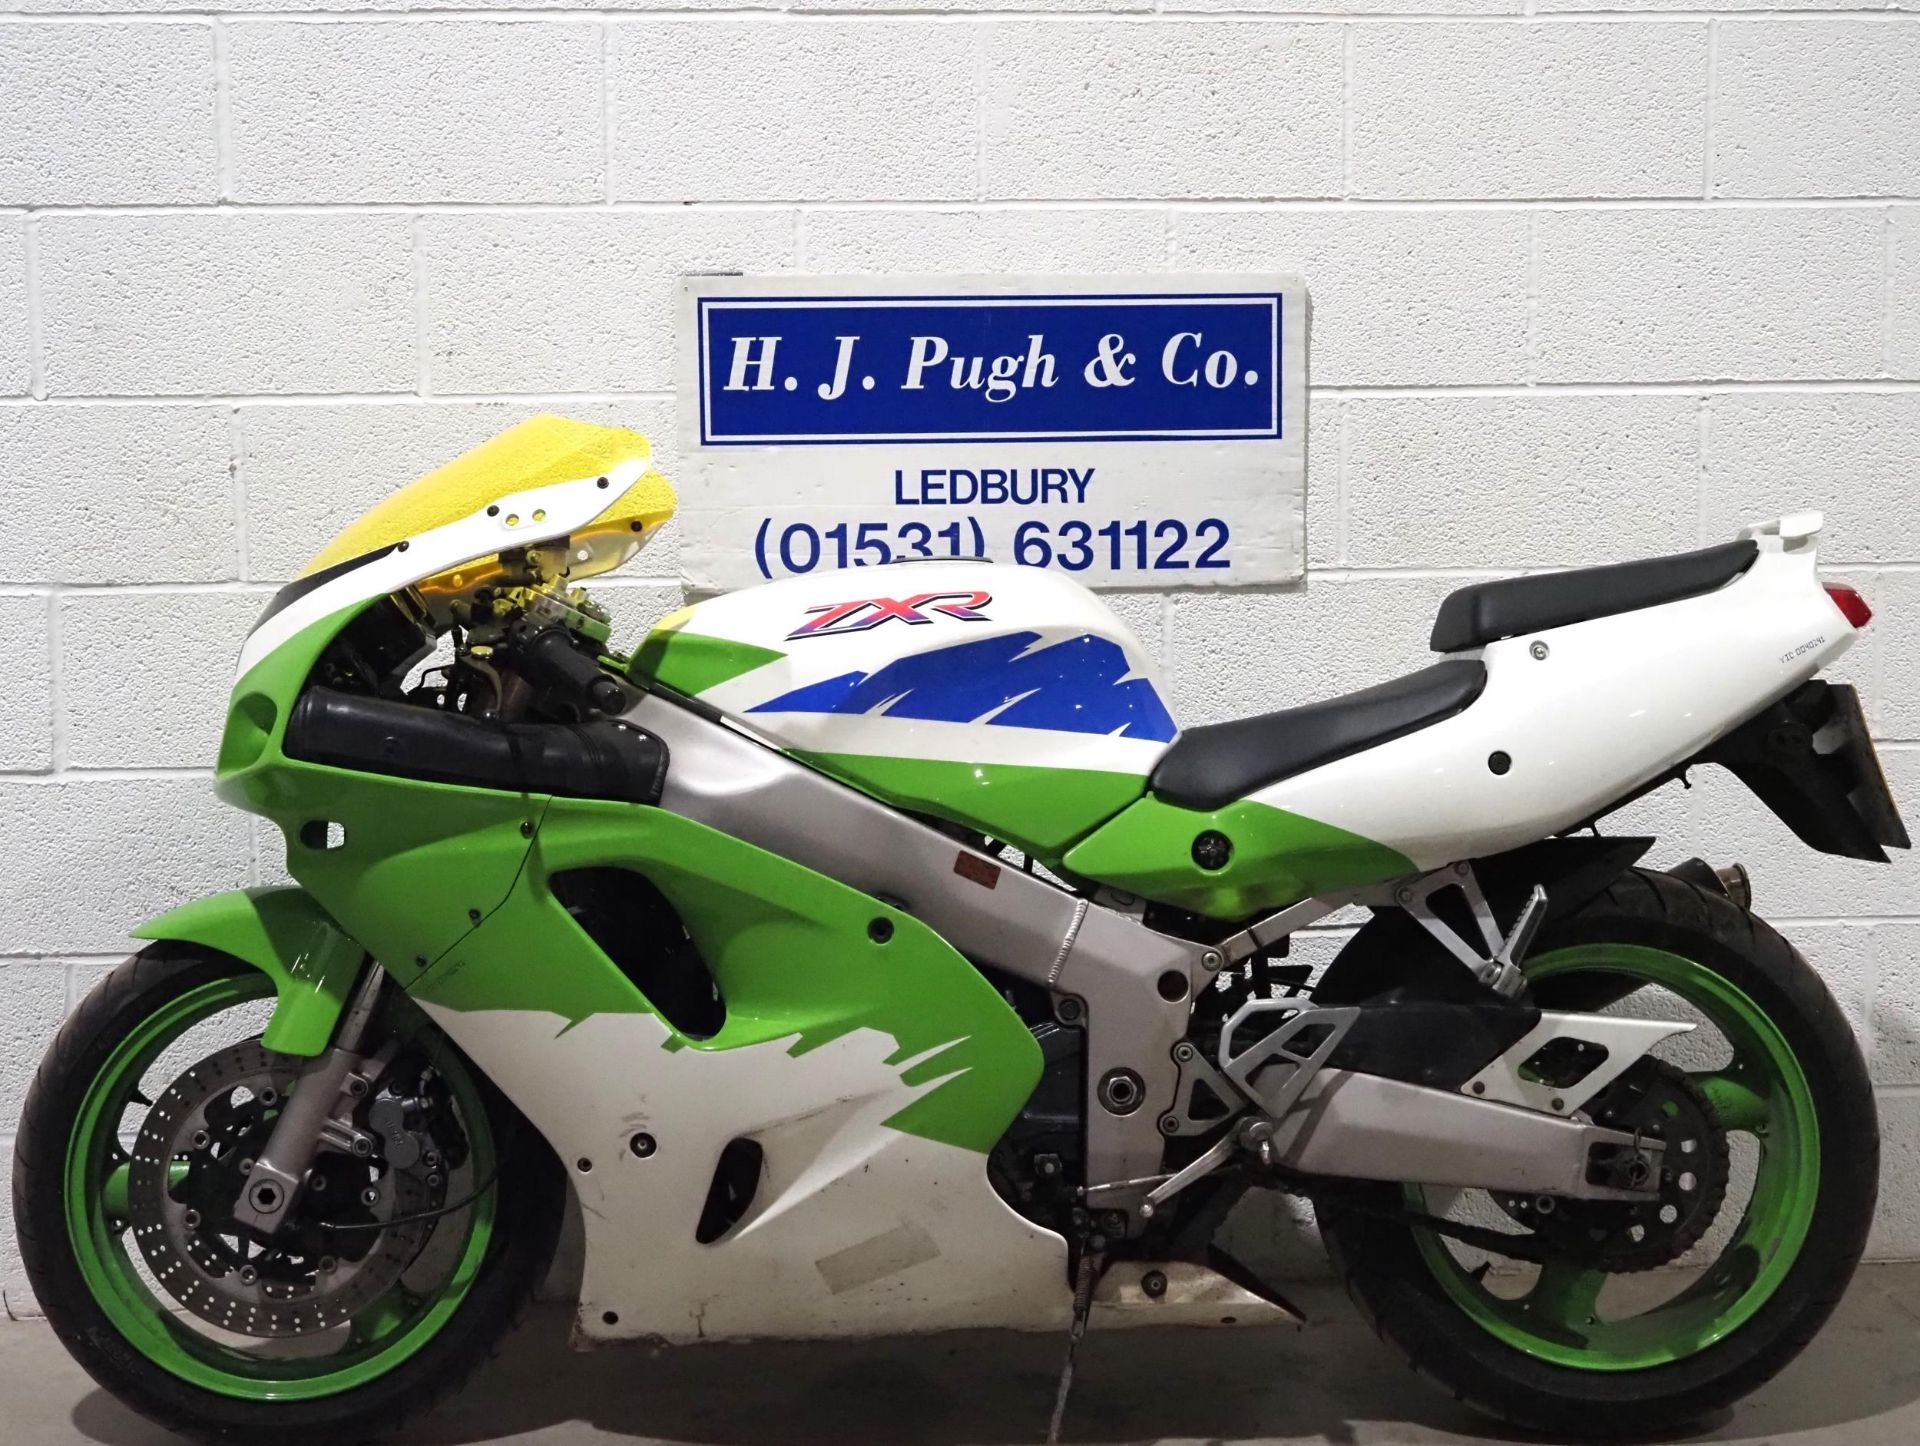 Kawasaki ZXR750 motorcycle. 1995. 749cc. Runs and rides. Fitted with carbon exhaust and stage 2 dyno - Bild 6 aus 6